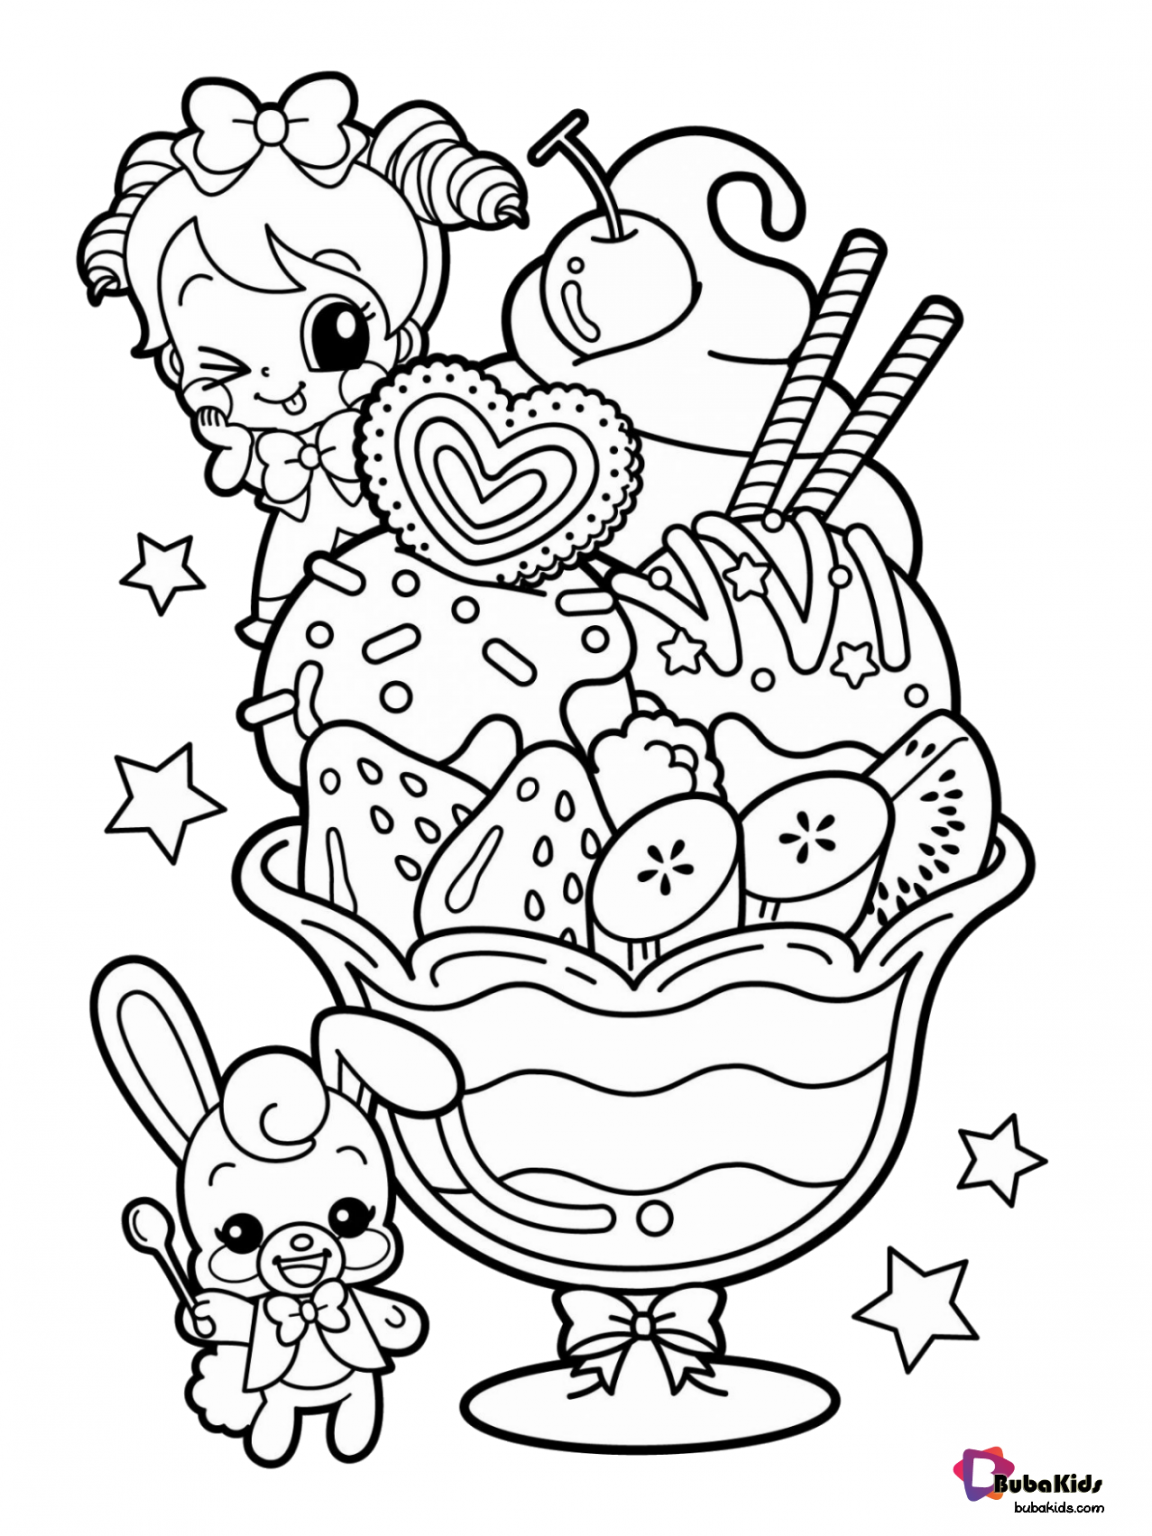 Food Coloring Page For Kids BubaKids